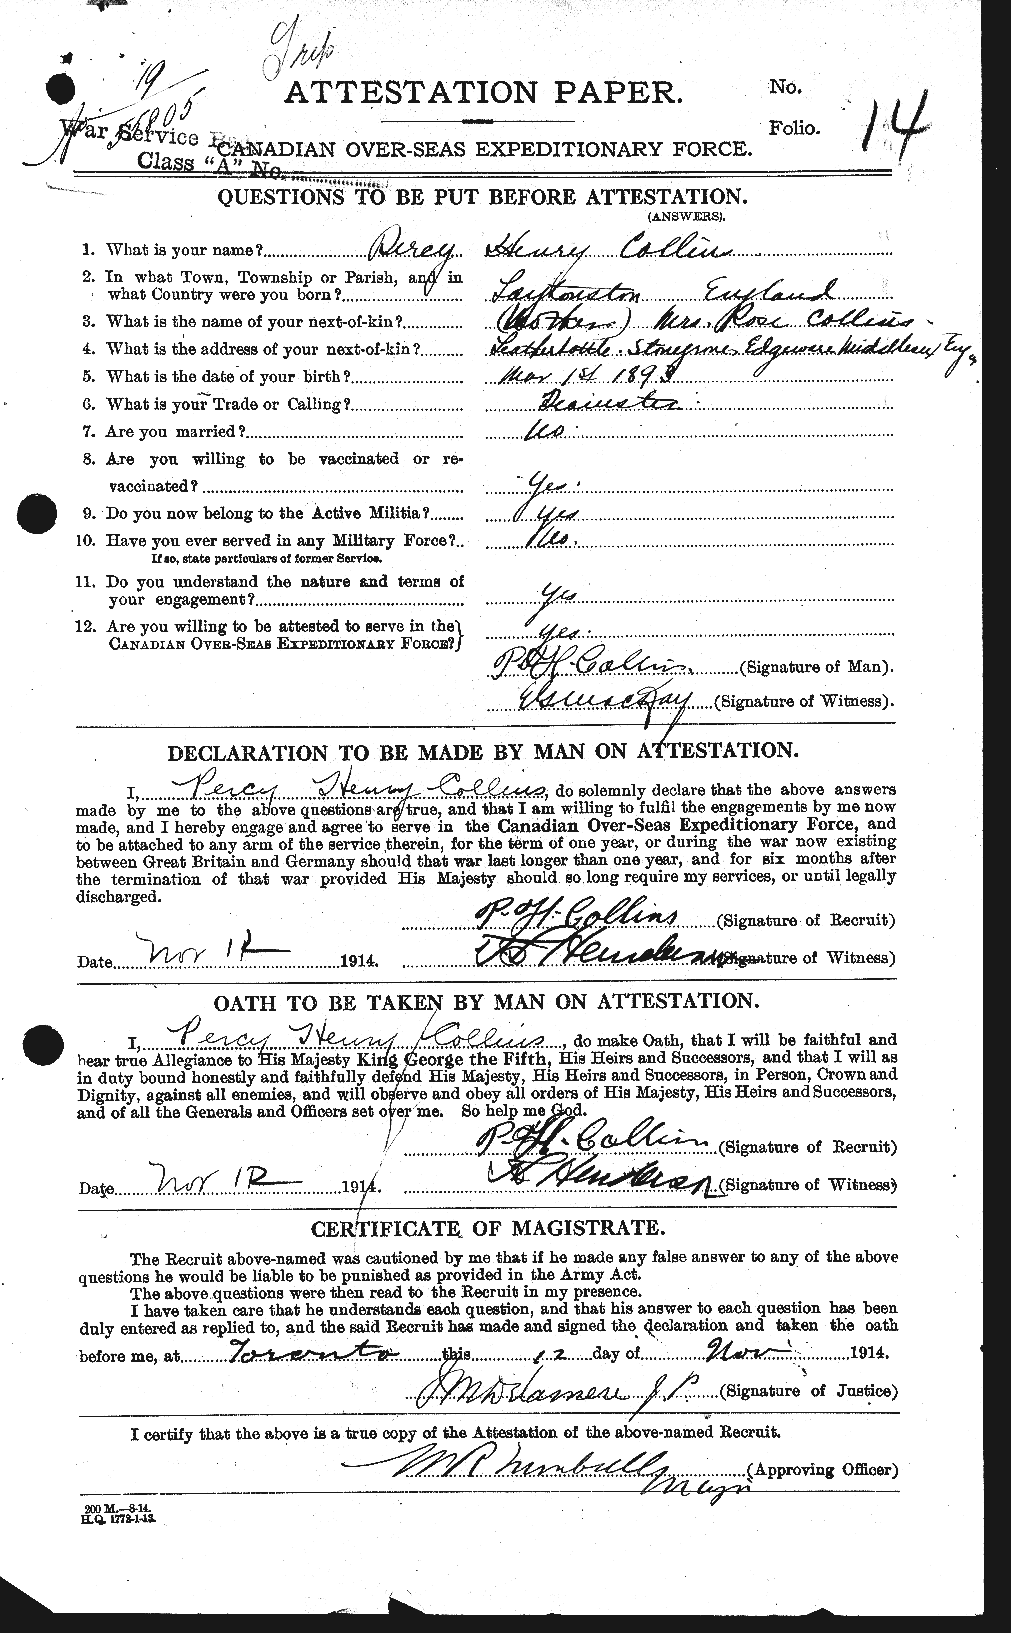 Personnel Records of the First World War - CEF 069295a